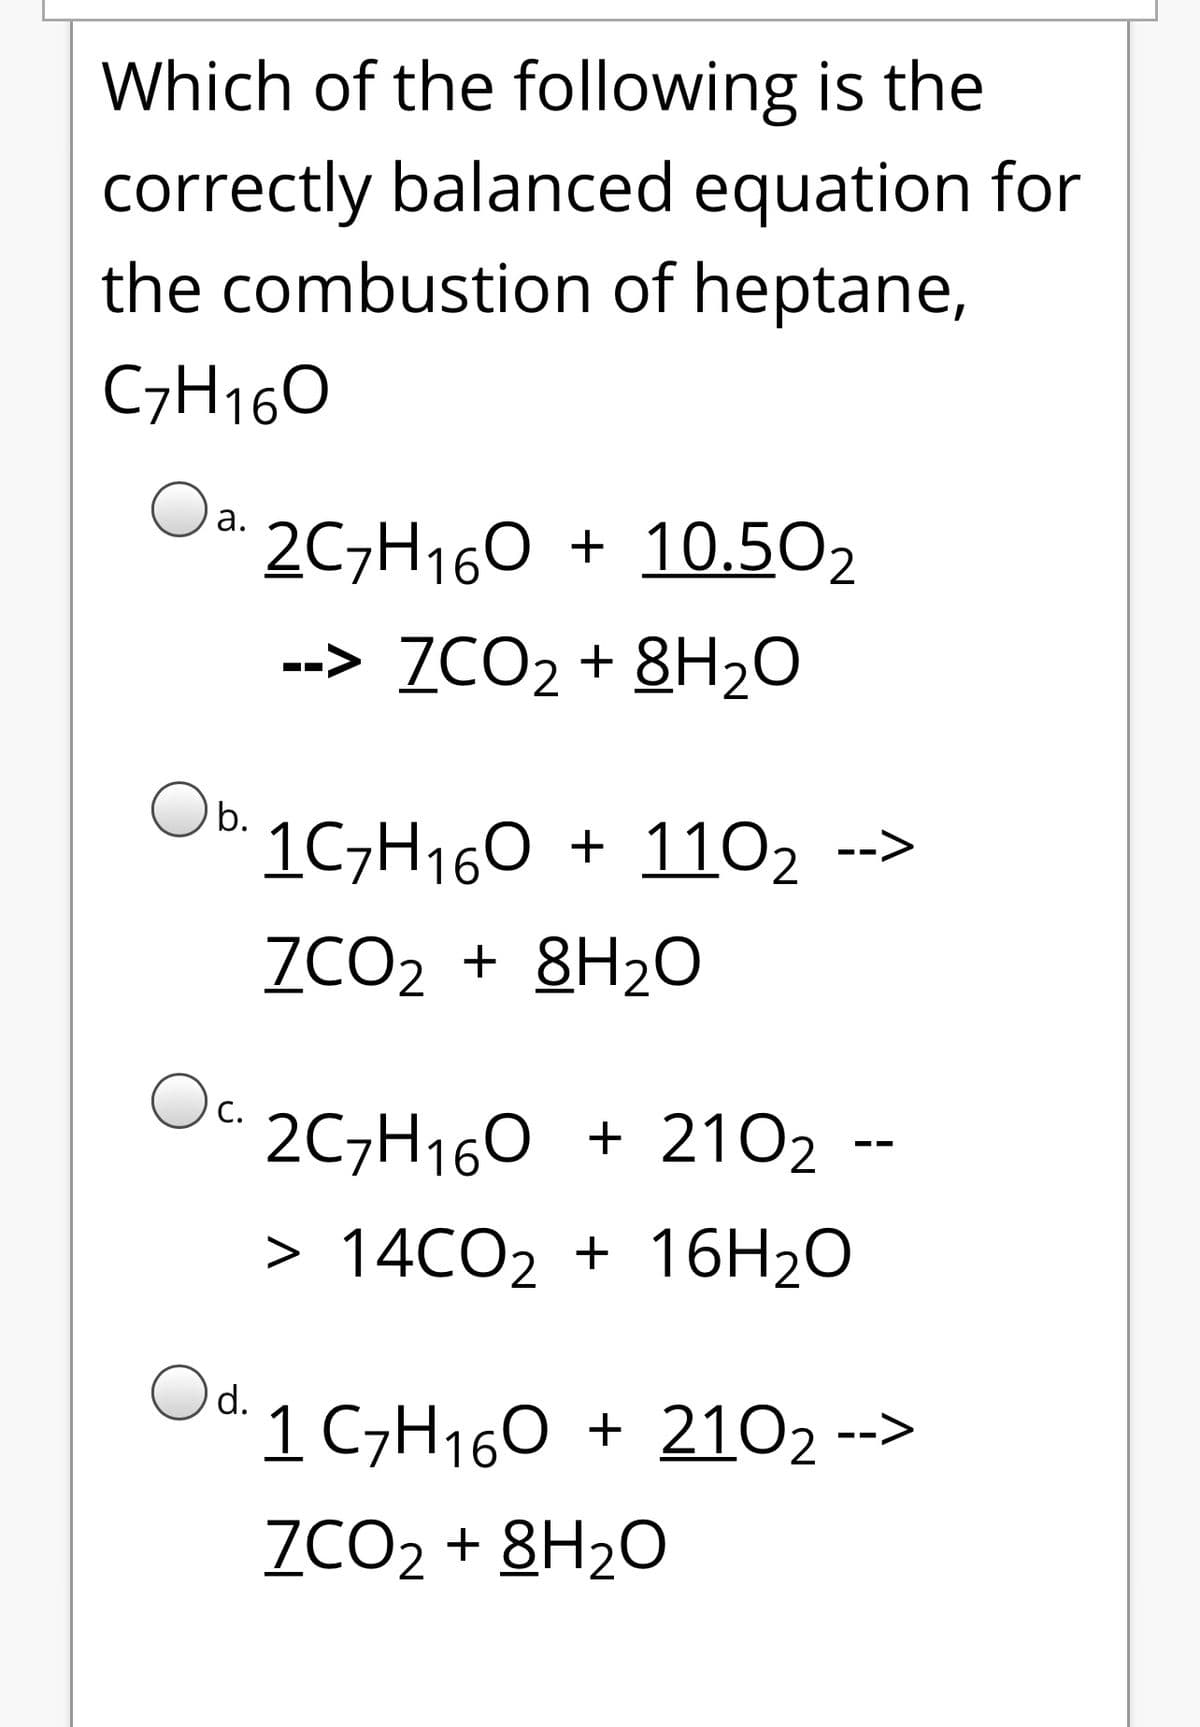 Which of the following is the
correctly balanced equation for
the combustion of heptane,
C7H160
Oa.
2C7H160 + 10.502
а.
--> ZCO2 + 8H20
Ob.
1C7H160 + 1102 -->
ZCO2 + 8H2O
Oc.
2C7H160 + 2102 --
> 14CO2 + 16H20
Od.
1 C7H160 + 2102 -->
ZCO2 + 8H2O
